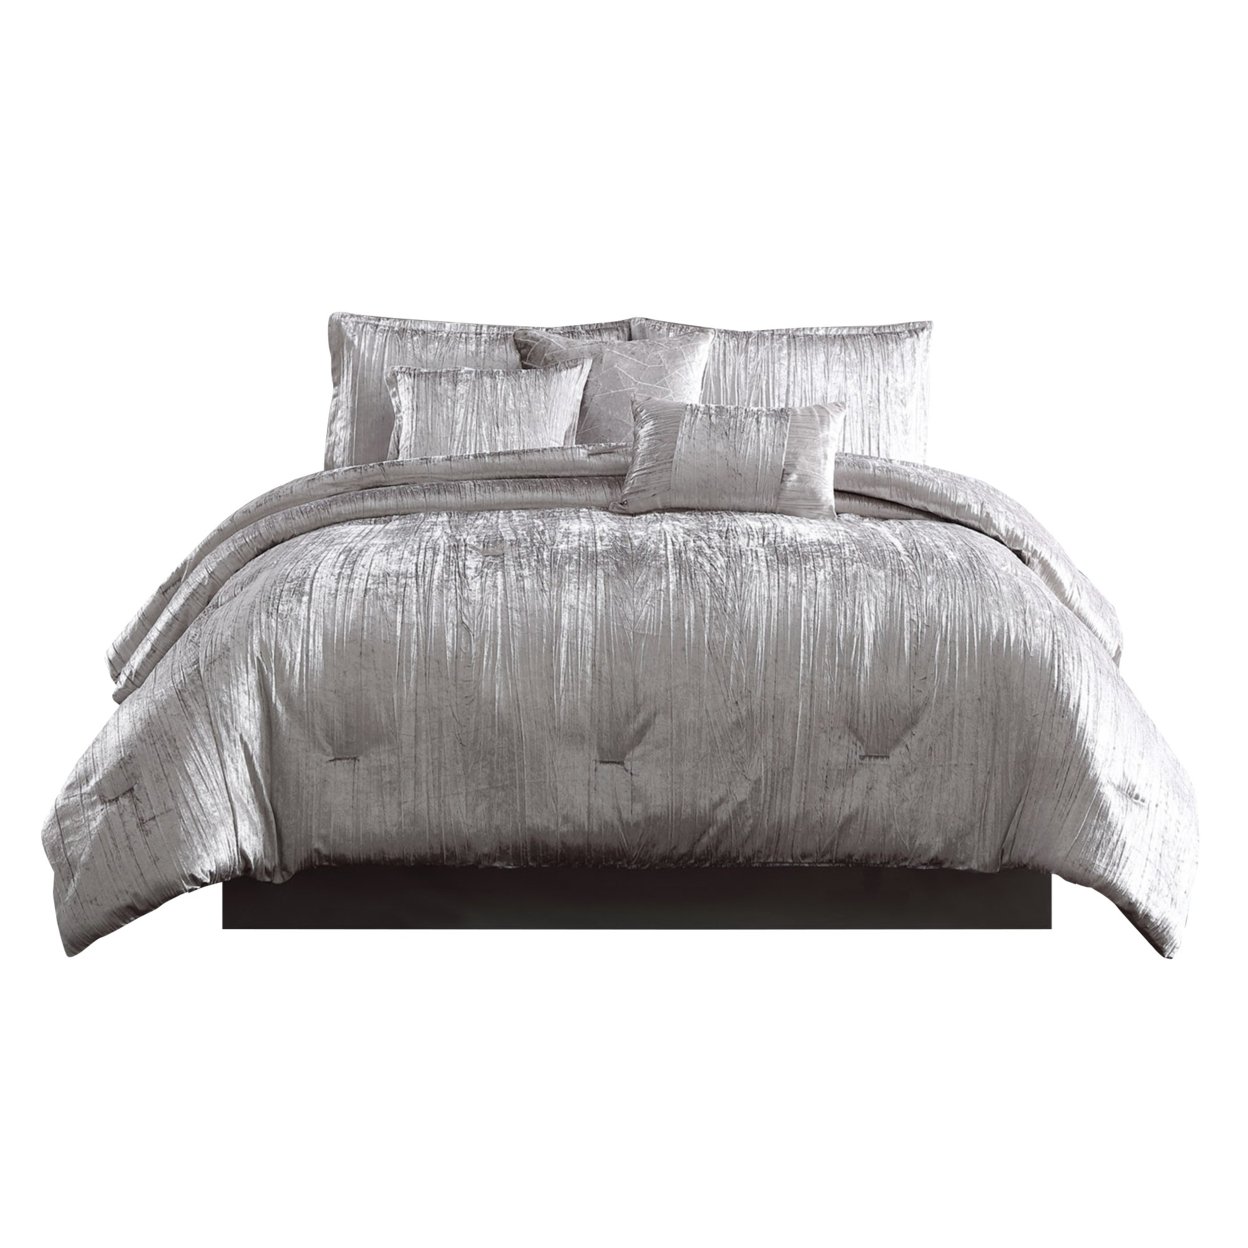 6 Piece Twin Comforter Set With Shimmering Appeal, Silver- Saltoro Sherpi